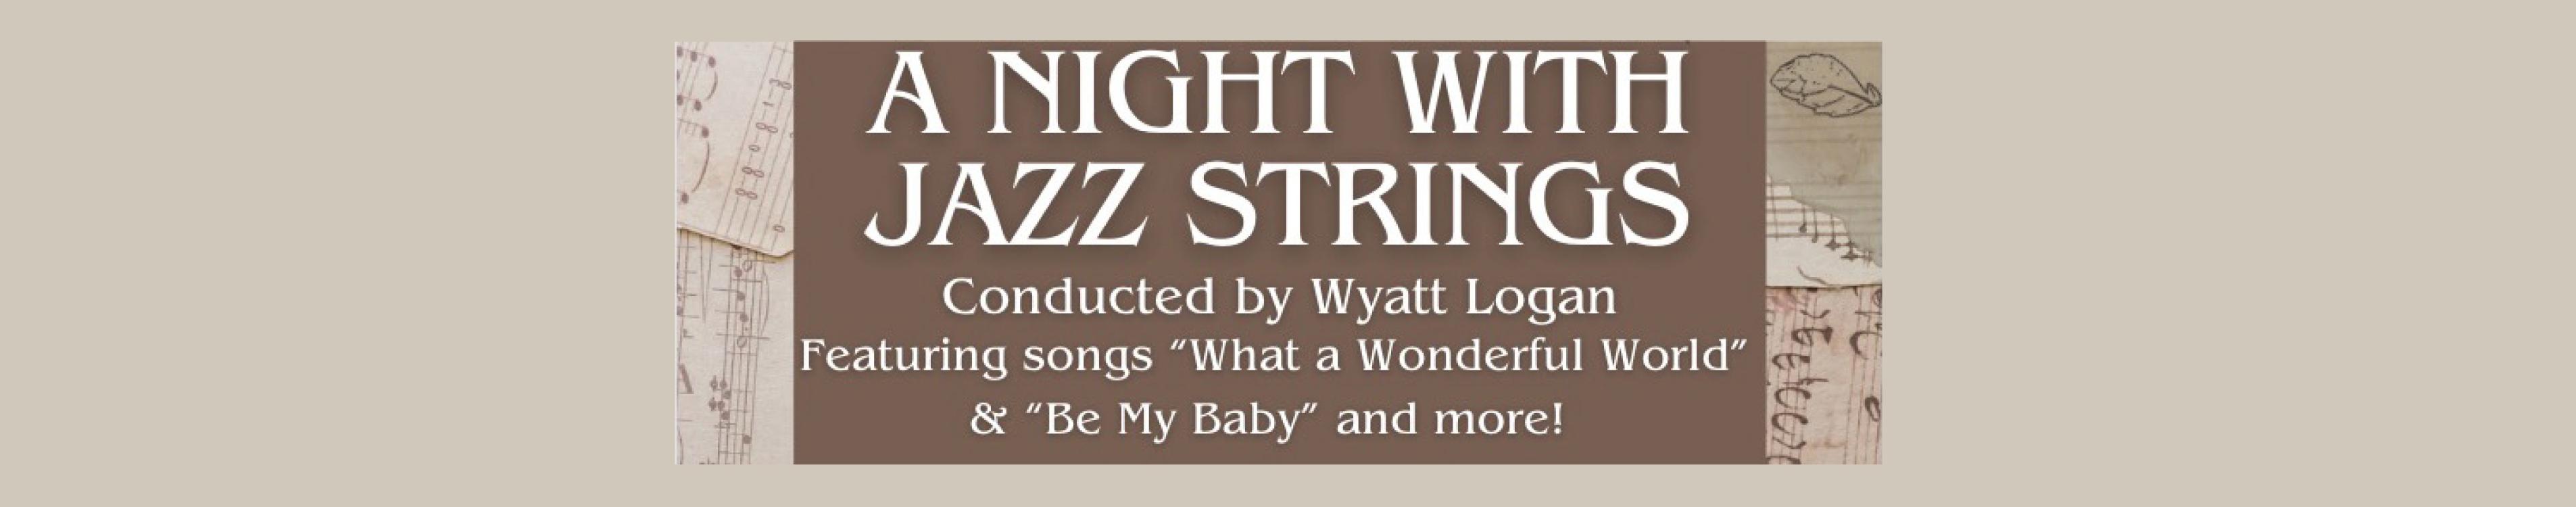 A Night with Jazz Strings